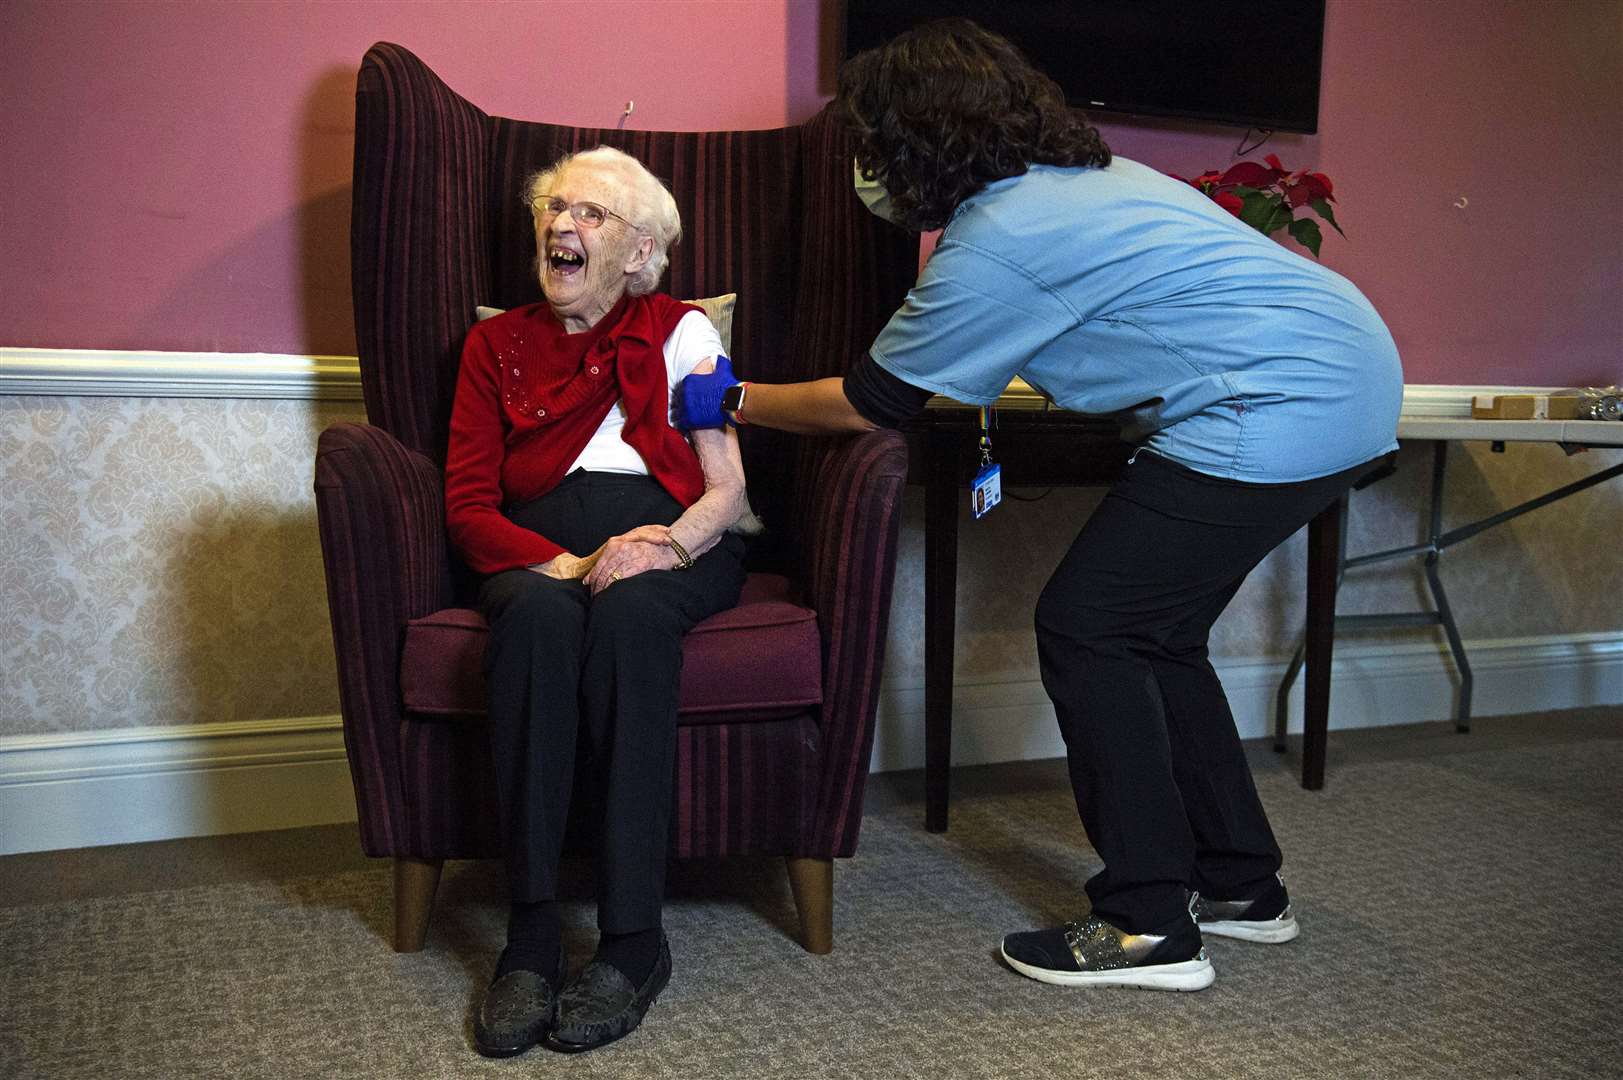 Ellen Prosser, 100, receives the Oxford/AstraZeneca Covid-19 vaccine from Dr Nikki Kanani (Kirsty O’Connor/PA)